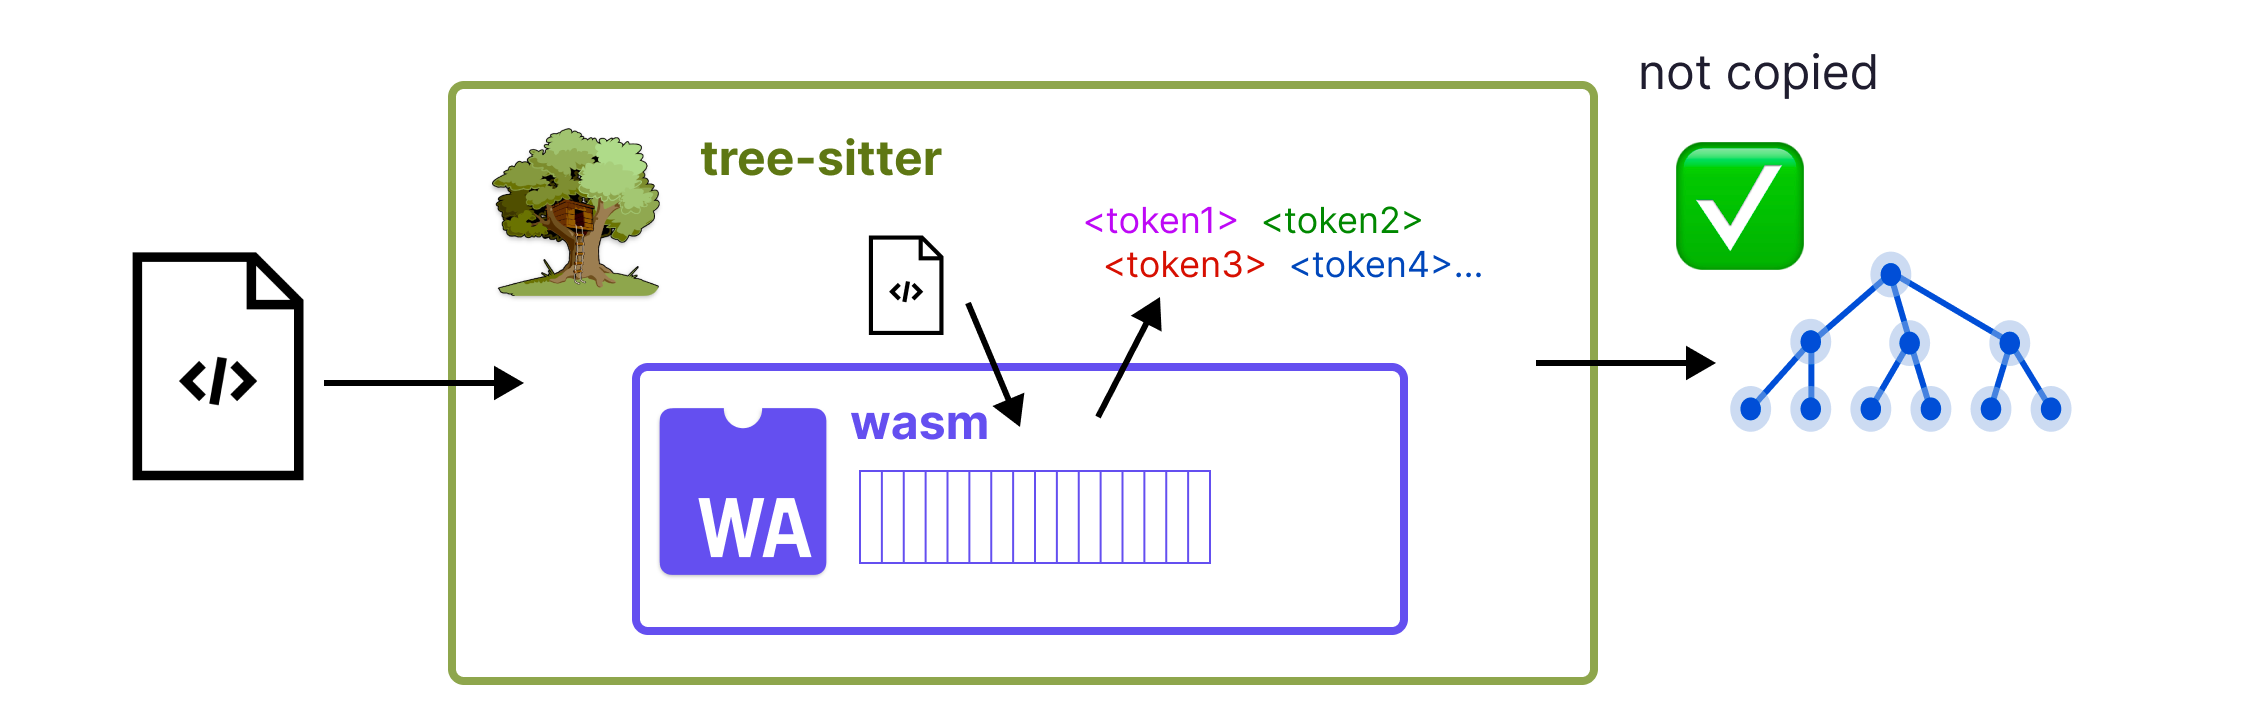 Tree-sitter uses wasm internally, just for the lexing step. The syntax tree is constructed natively.